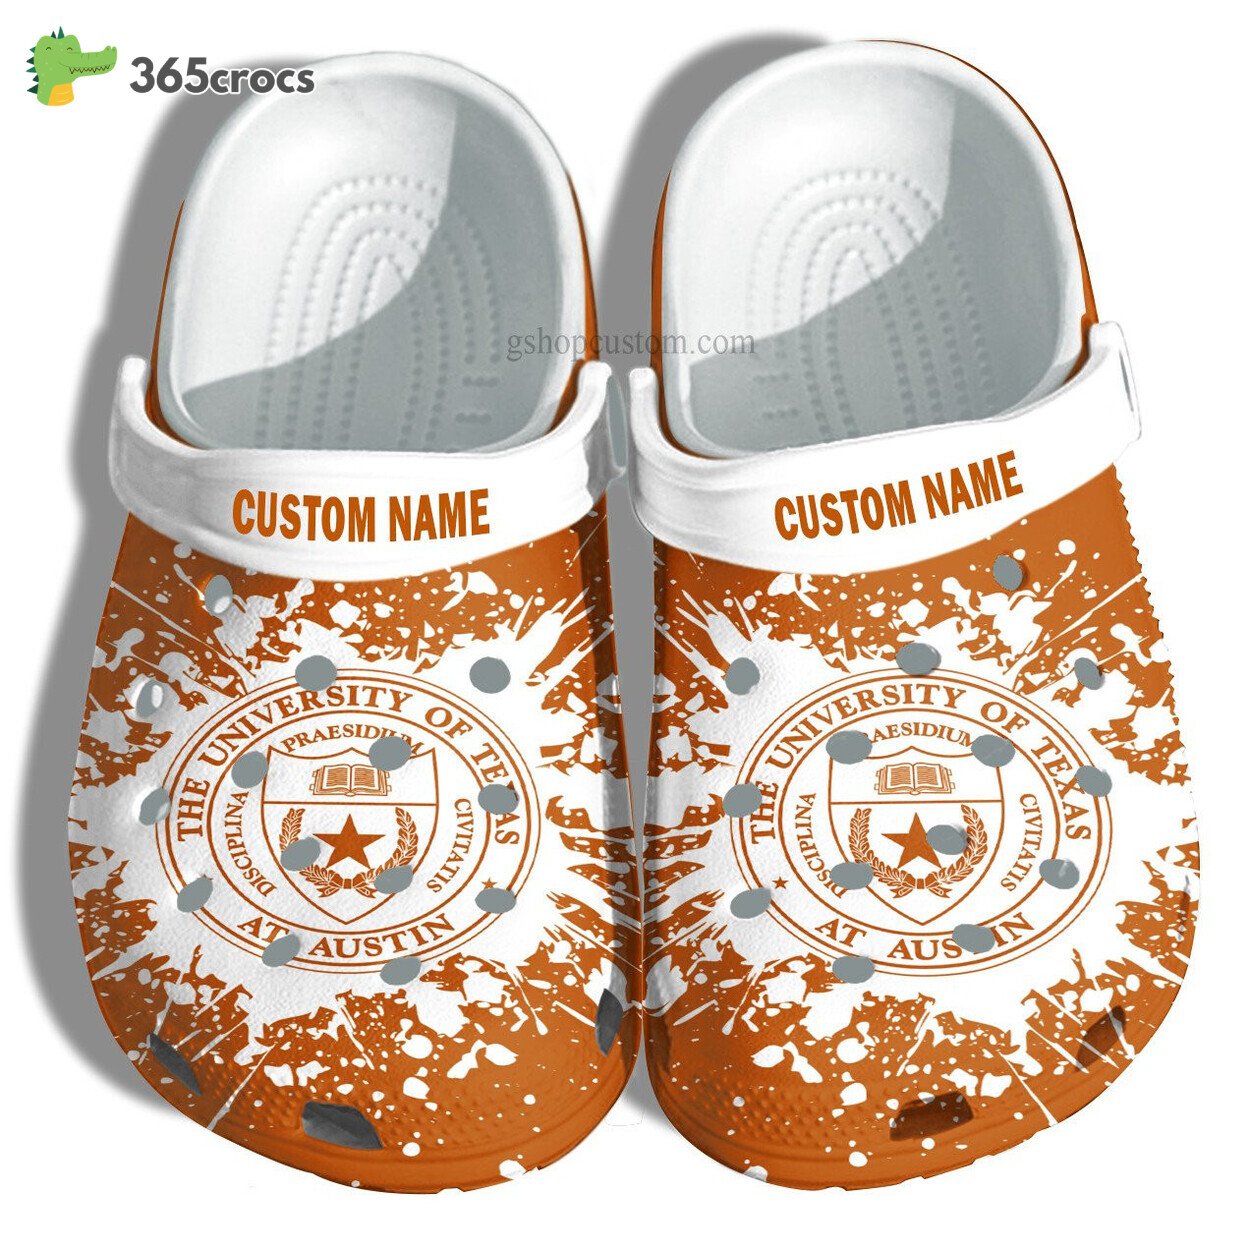 The University Of Texas Croc Shoes Customize University Graduation Gifts Shoes Admission Gift